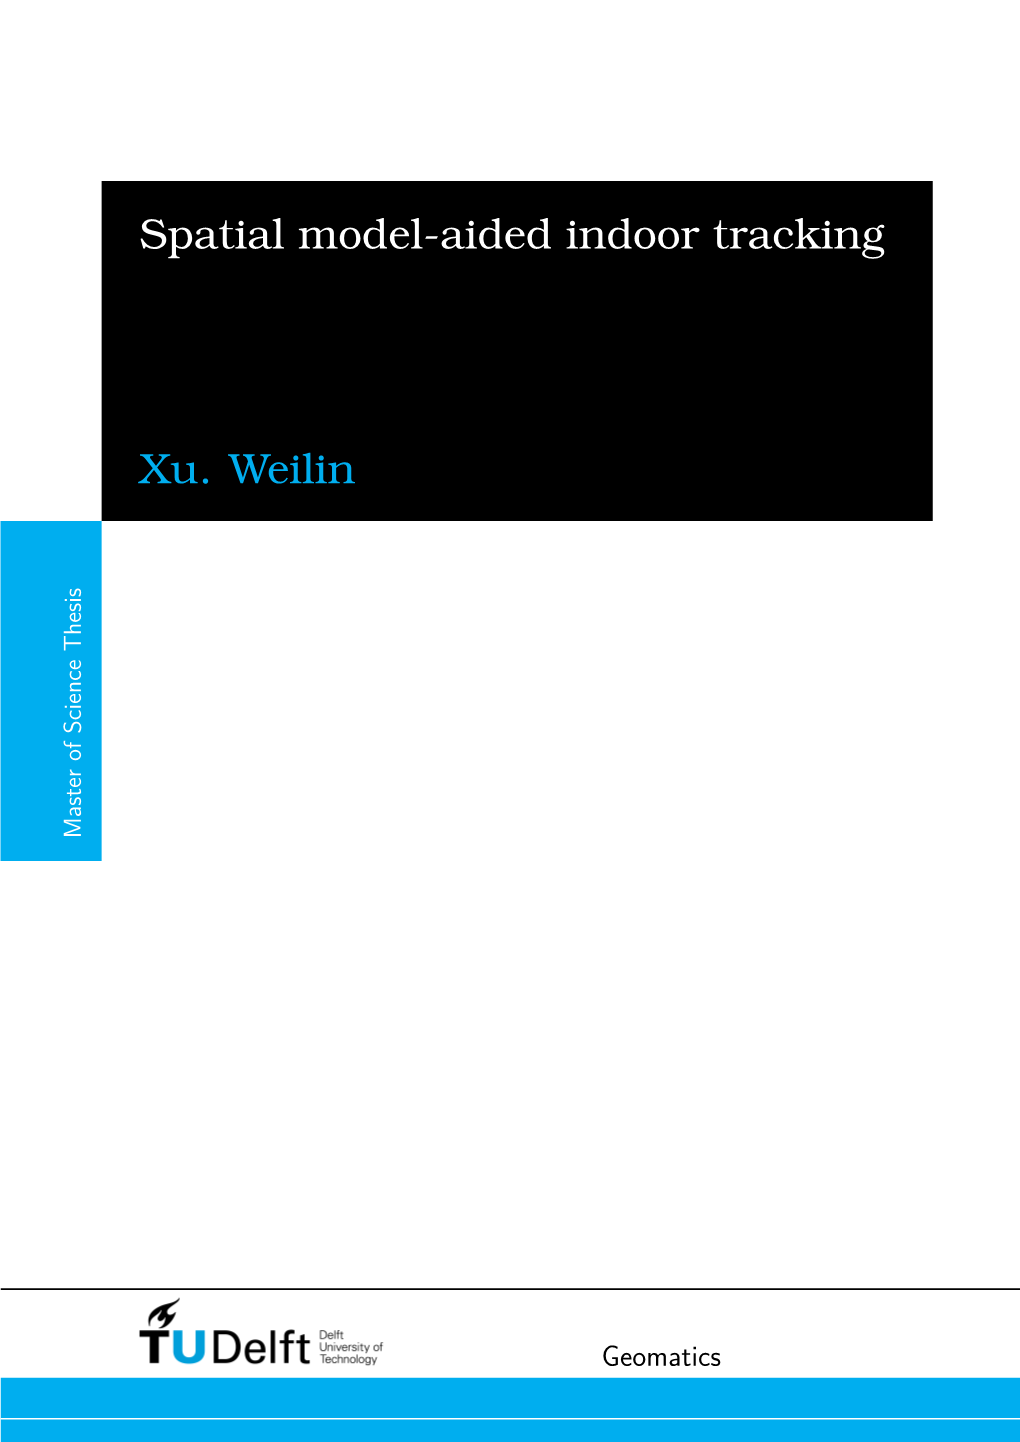 Masters Thesis: Spatial Model-Aided Indoor Tracking